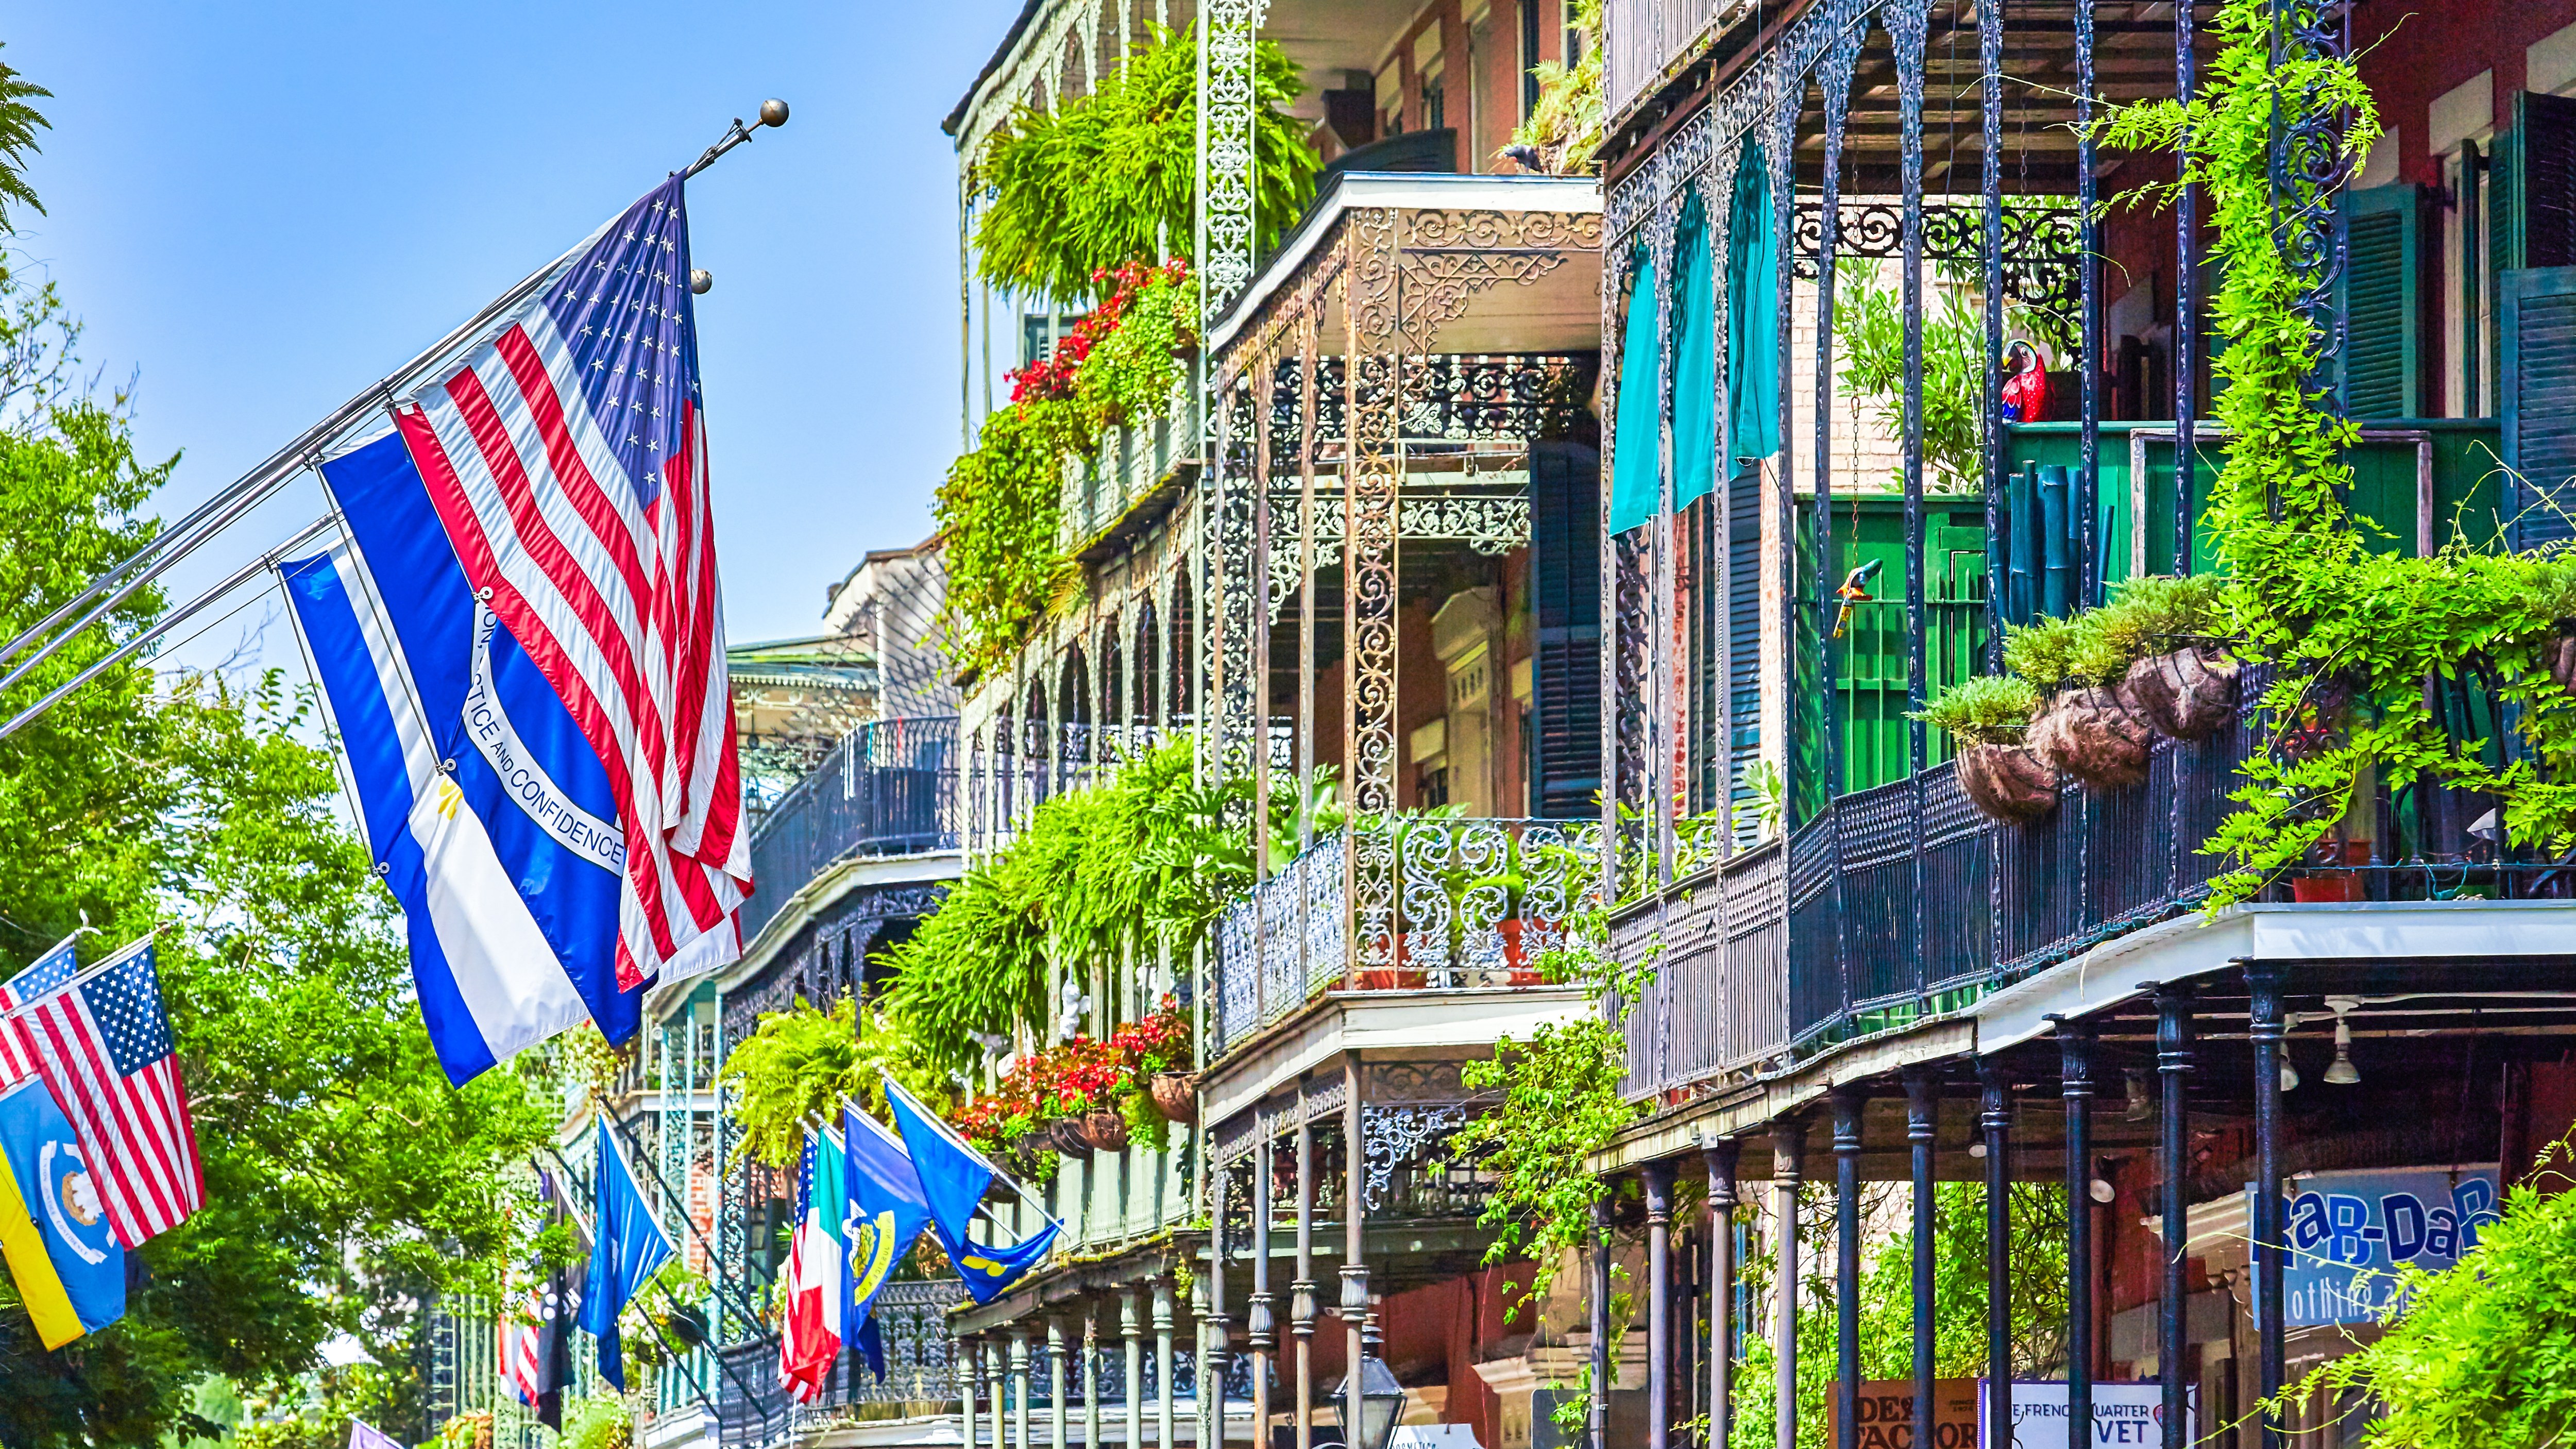 Wrought Iron lace adorns many old buildings and houses in New Orleans